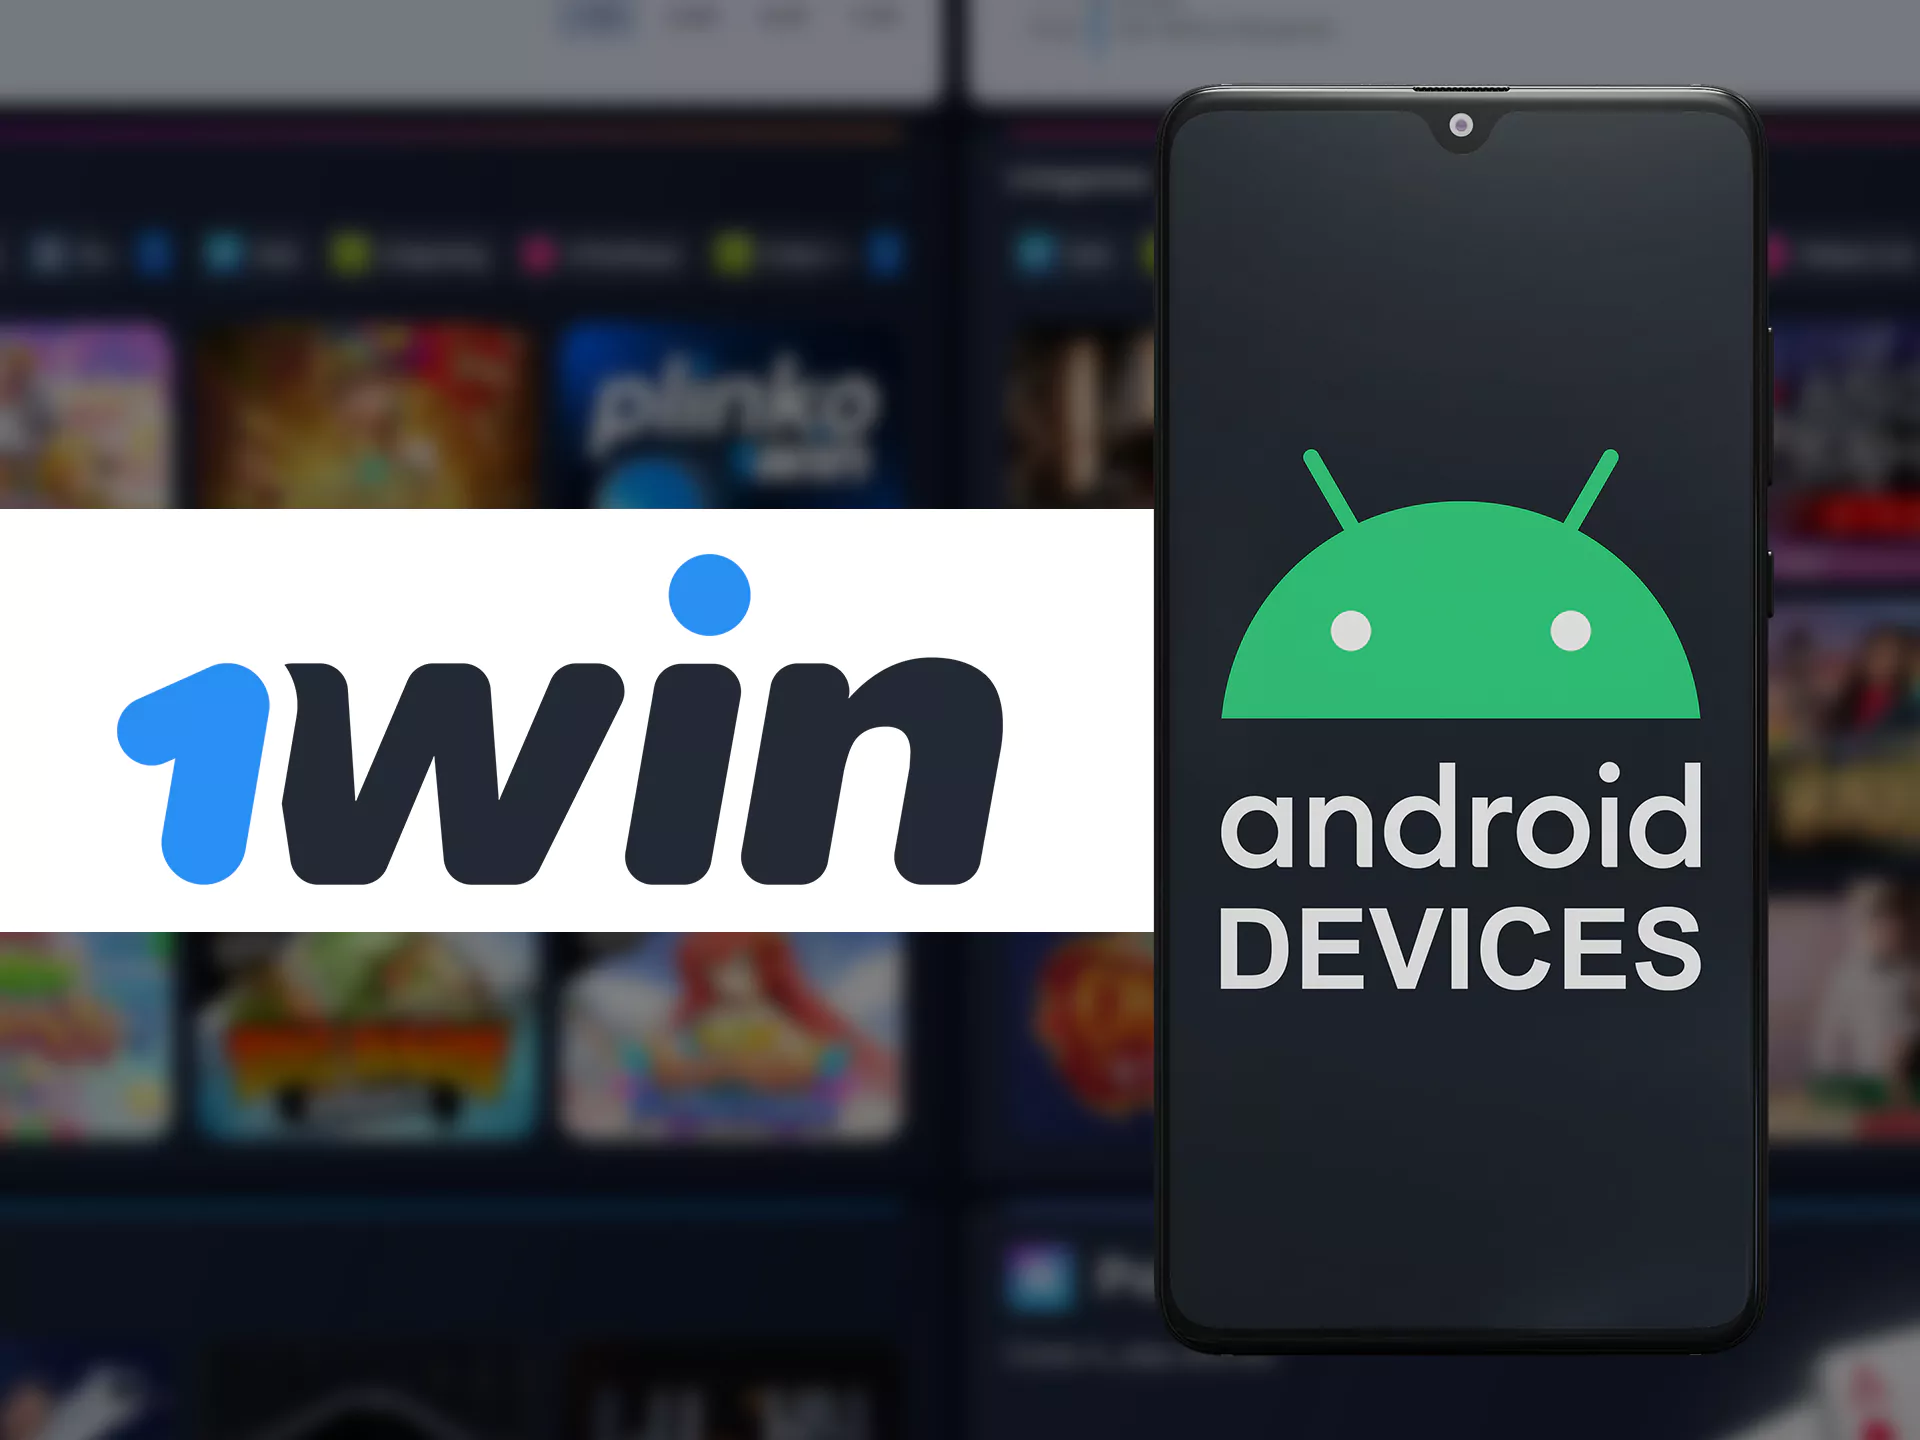 You can install 1win app on any android device.